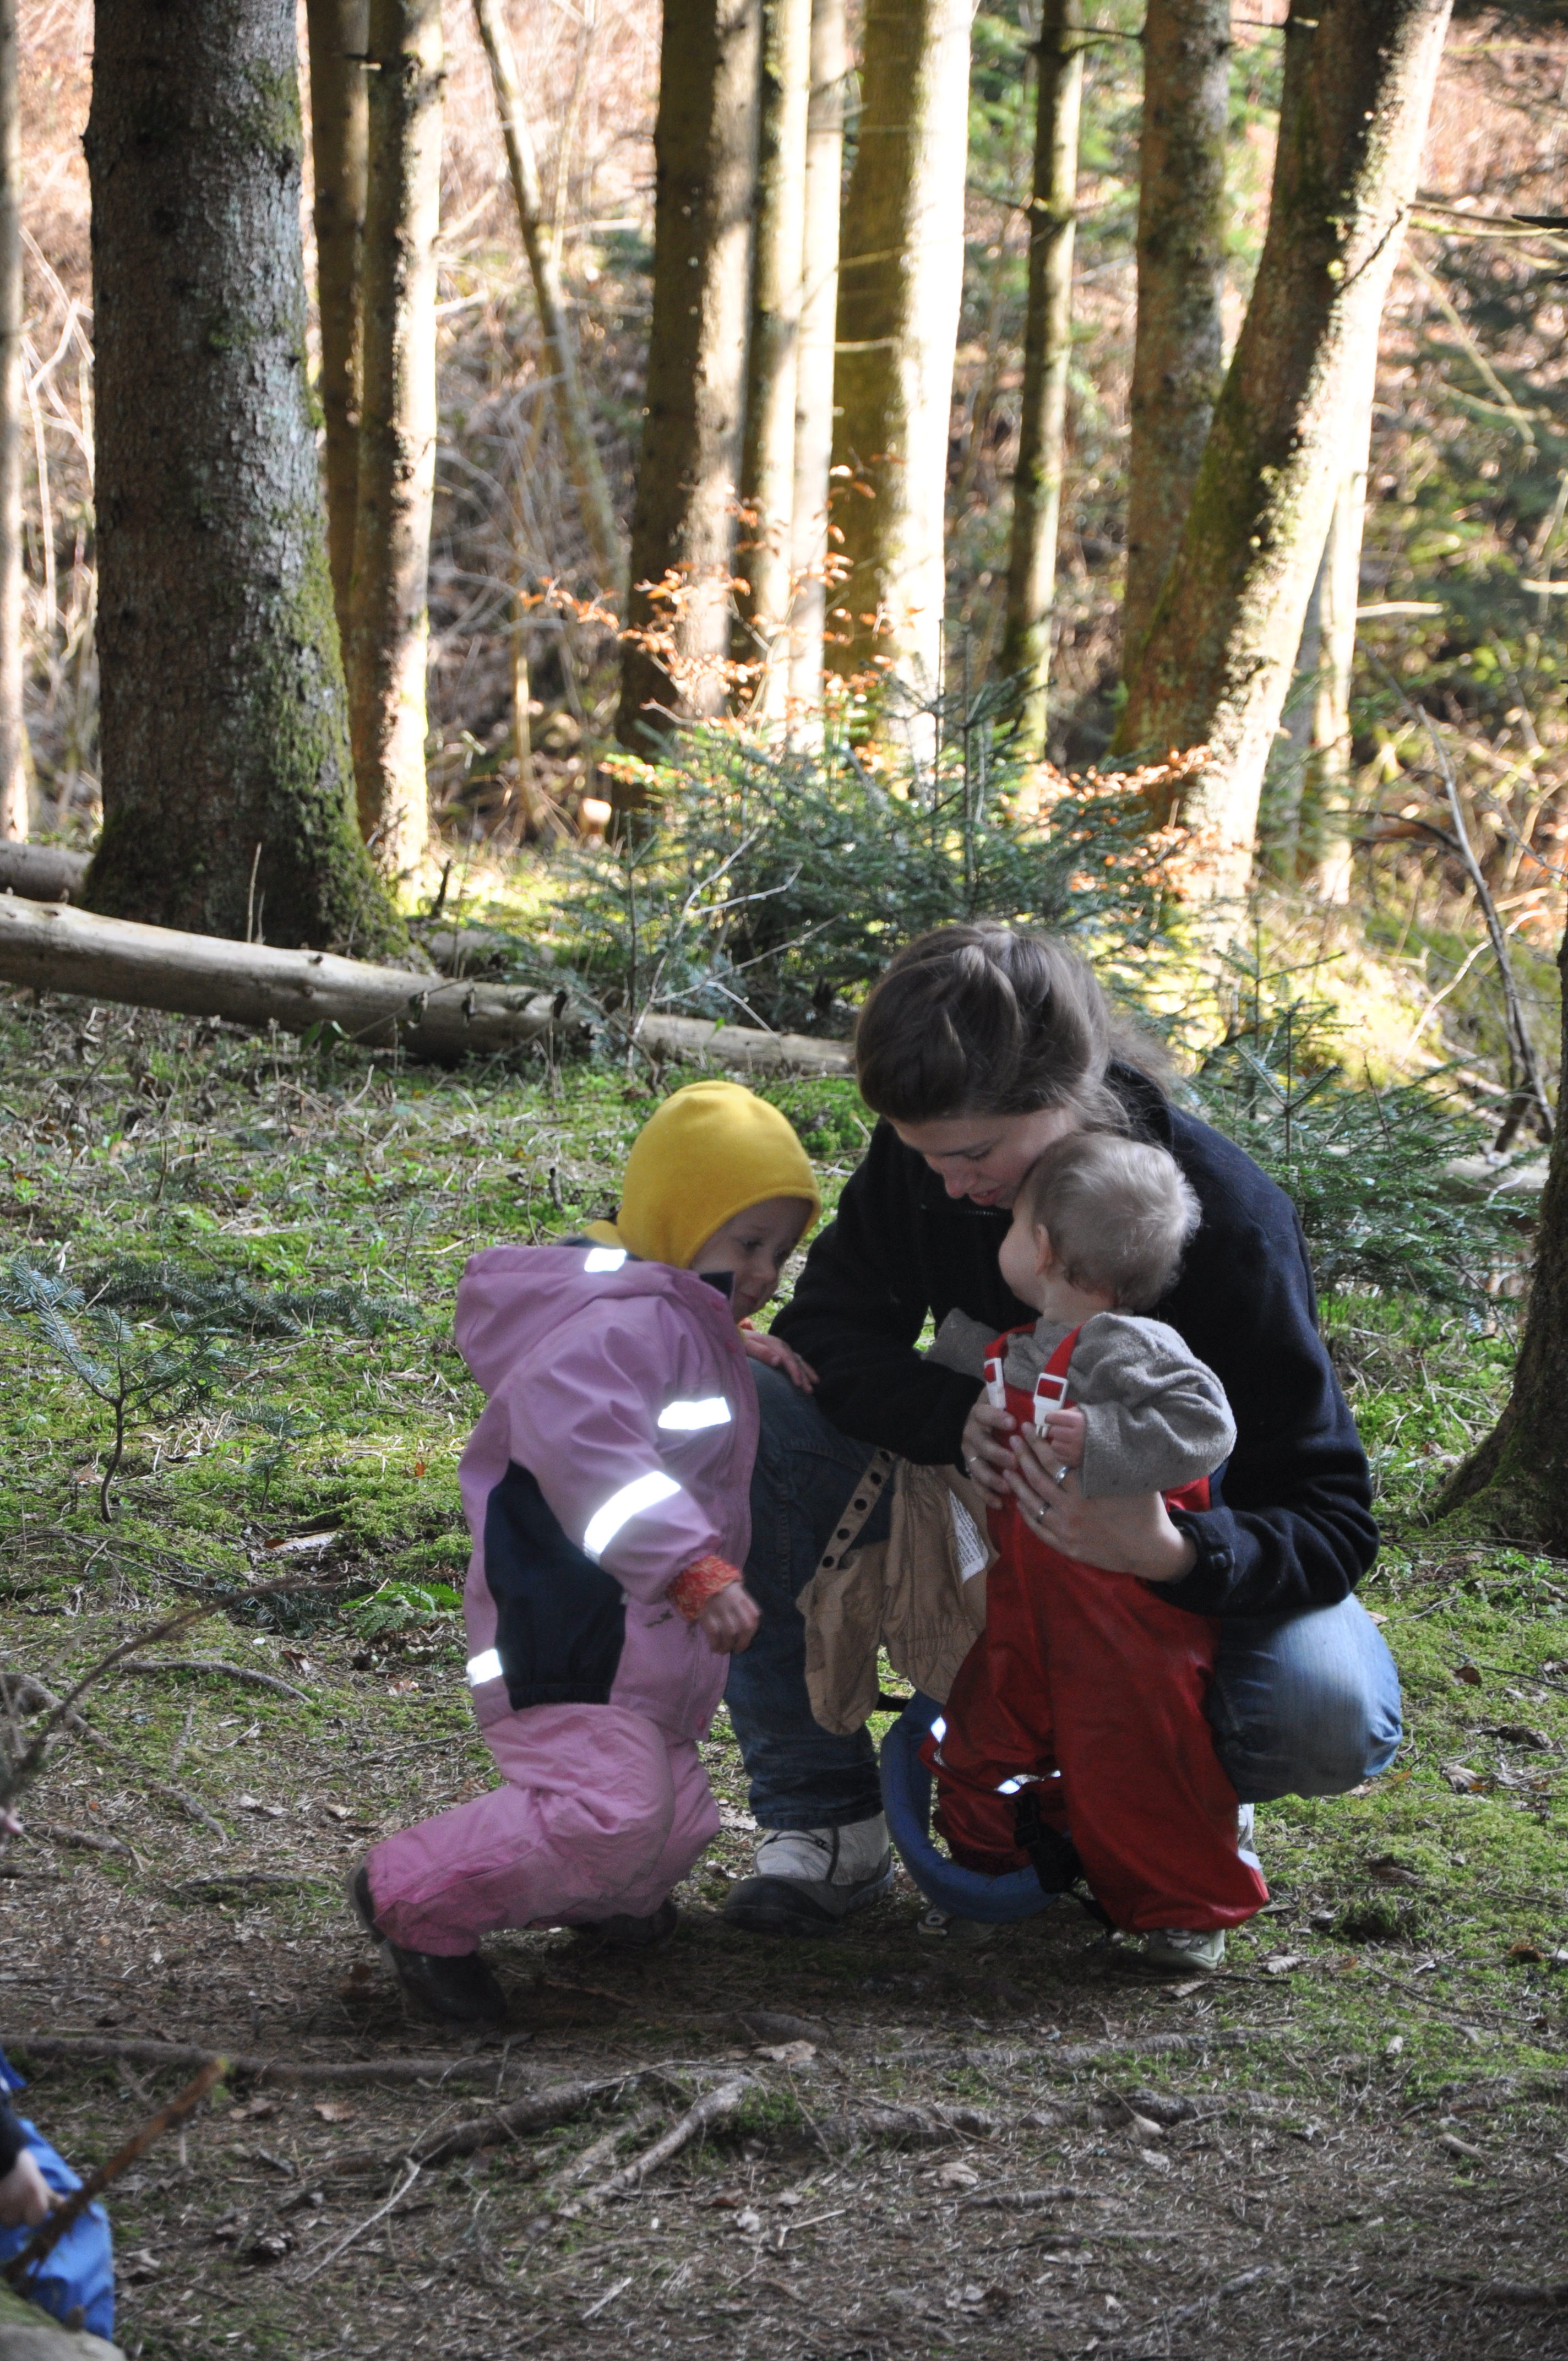 Forest Play Group for Toddlers - My favorite place to be